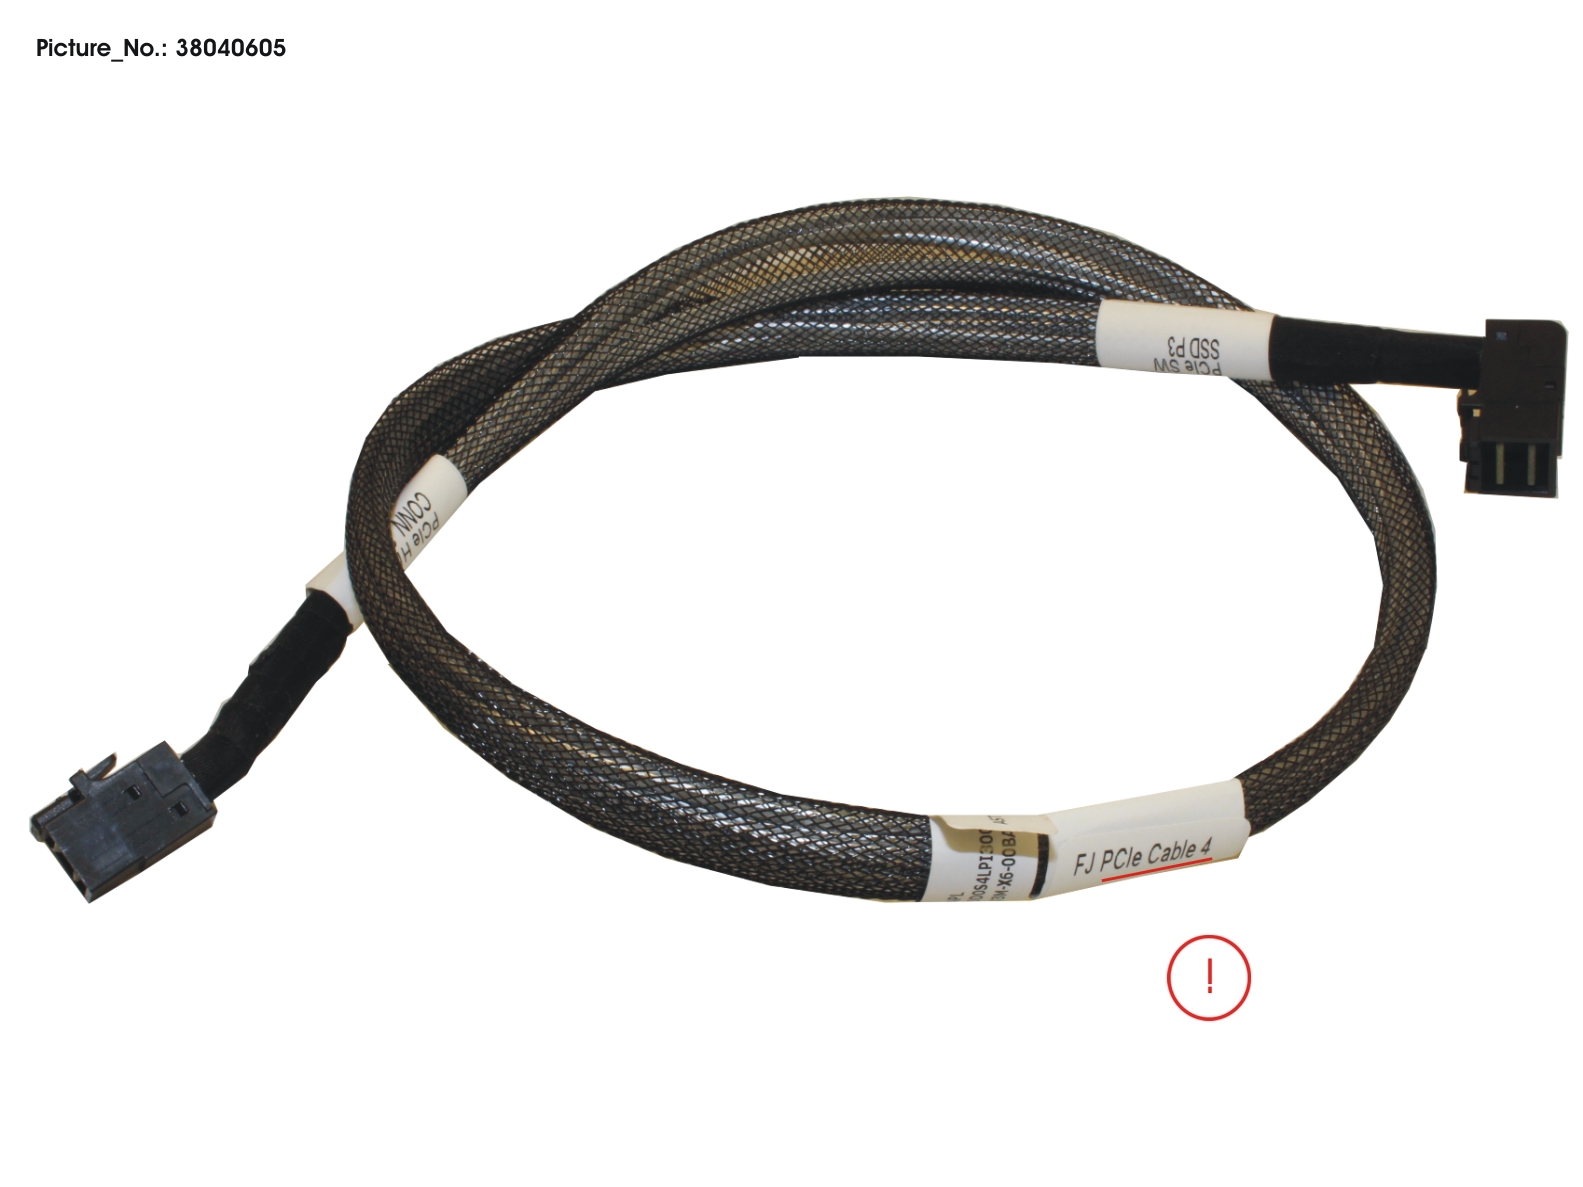 PCIE SSD CABLE 4